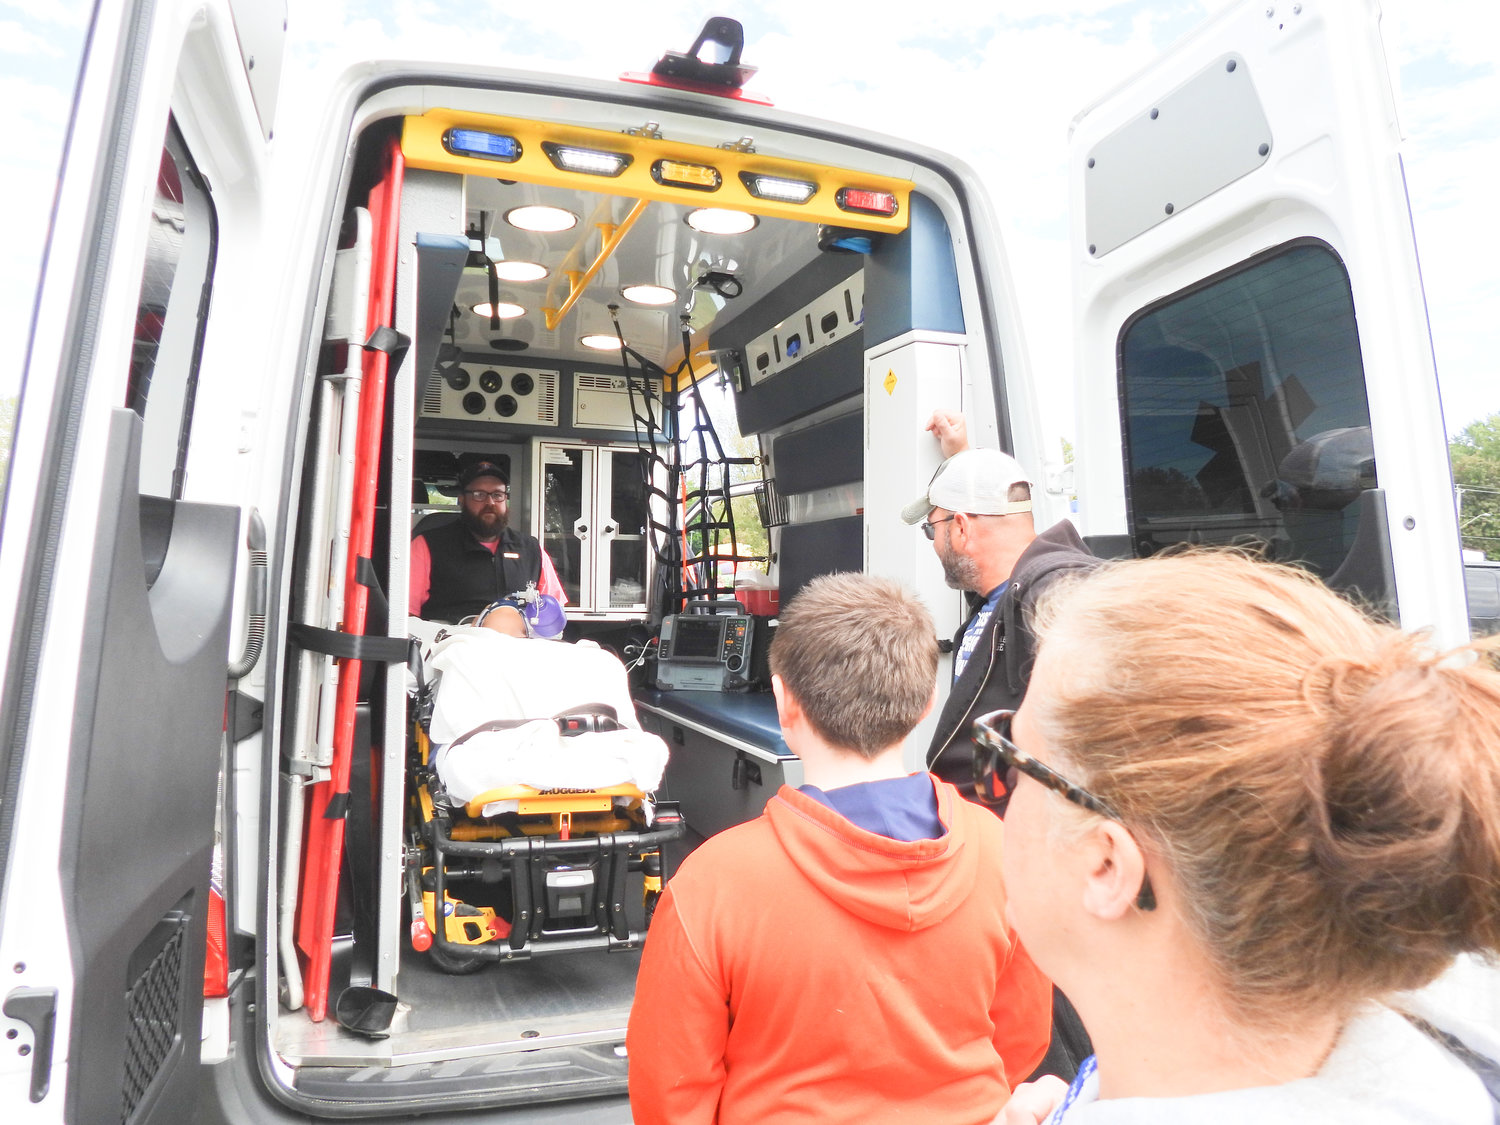 People attending the second annual Oneida Fall Fest on Saturday, Oct. 1 get a look into the back of ambulance owned by Vineall Ambulance.